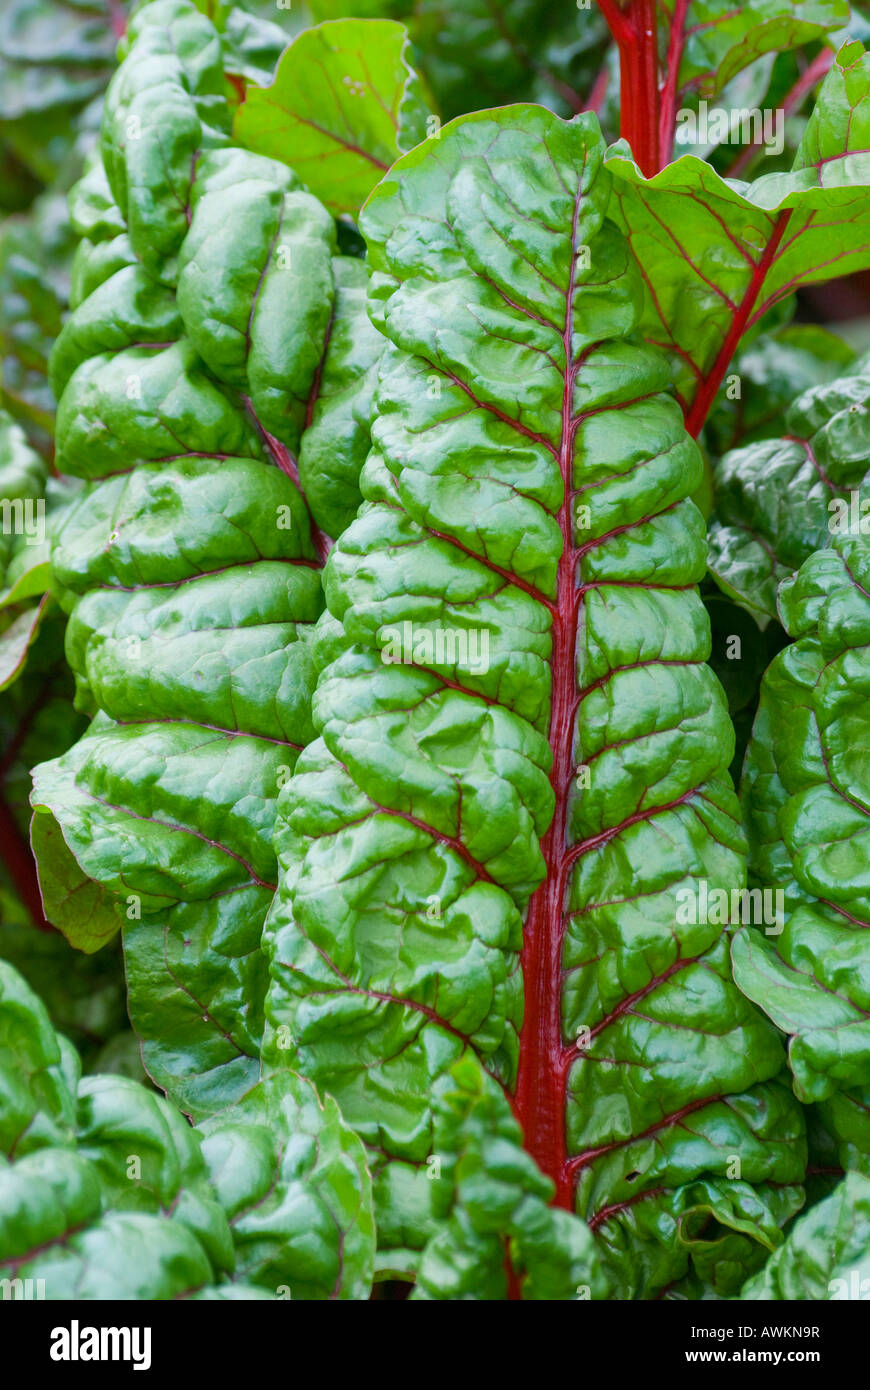 Red ribbed silver beet also known as Swiss chard Stock Photo